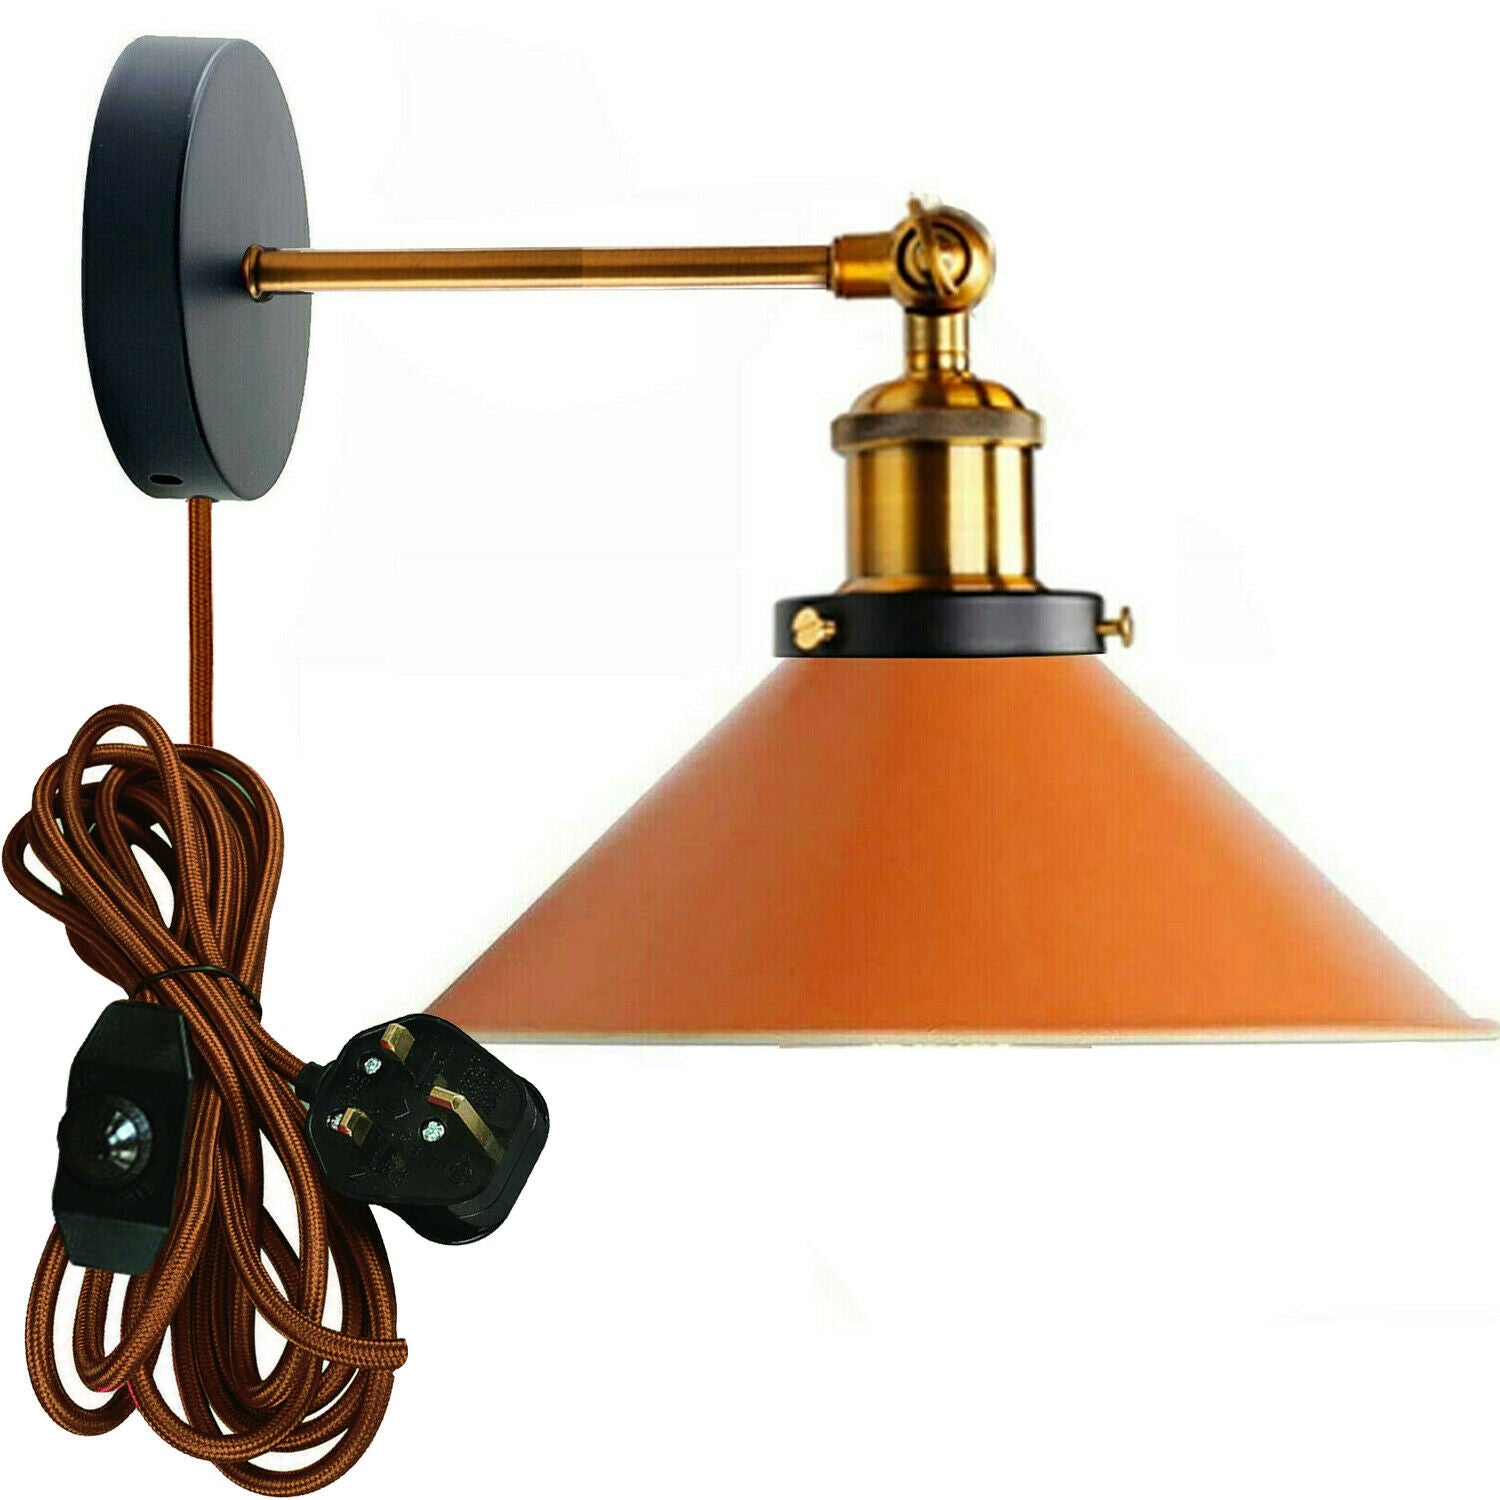 Industrial  Metal Cone Shape Shade Fitting Plug in Wall Light With Dimmer Switch